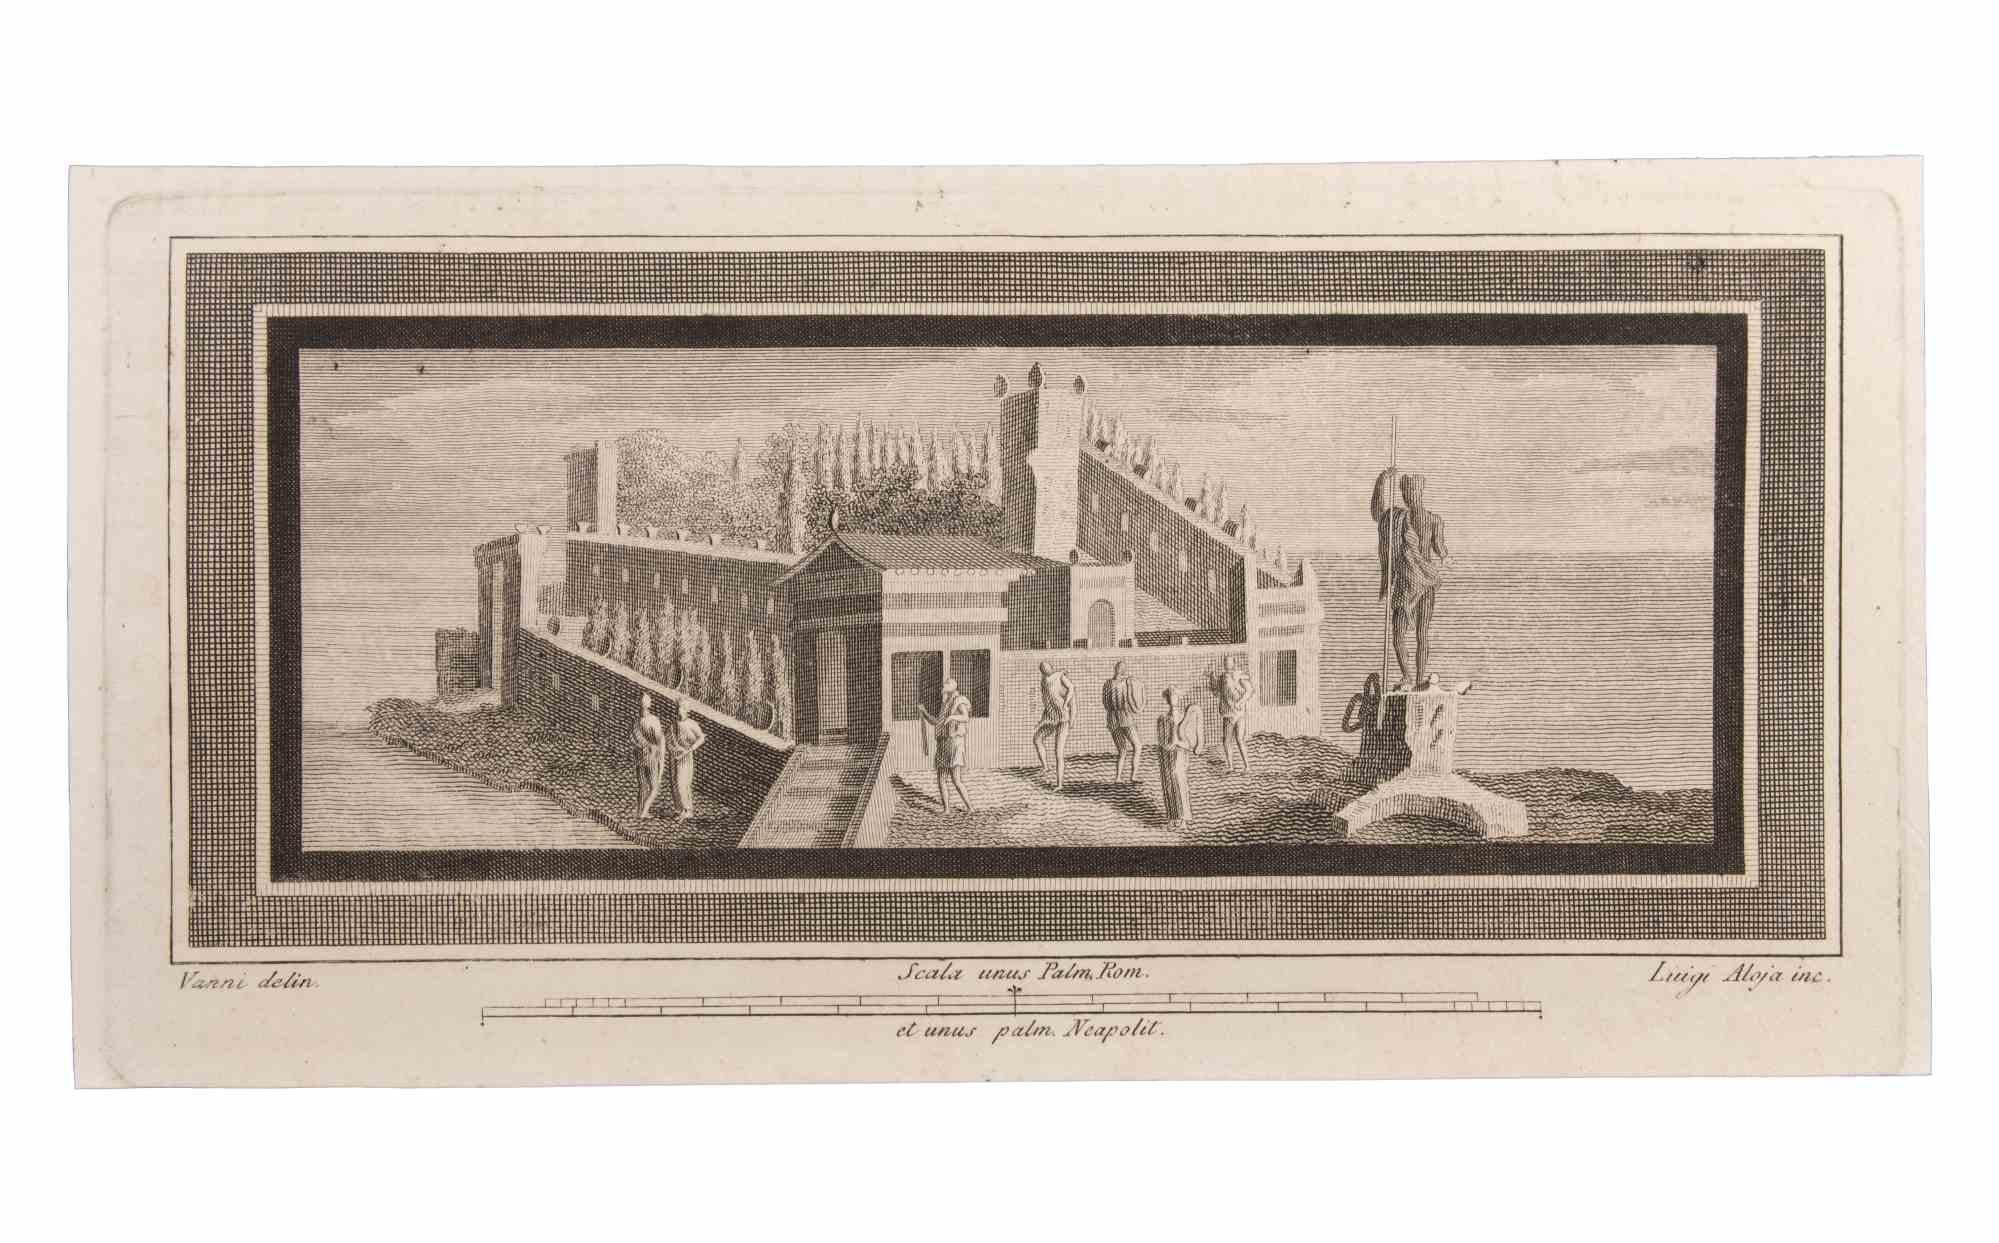 Seascapes With Monument and Figures is an Etching realized by  Luigi Aloja (1783-1837).

The etching belongs to the print suite “Antiquities of Herculaneum Exposed” (original title: “Le Antichità di Ercolano Esposte”), an eight-volume volume of